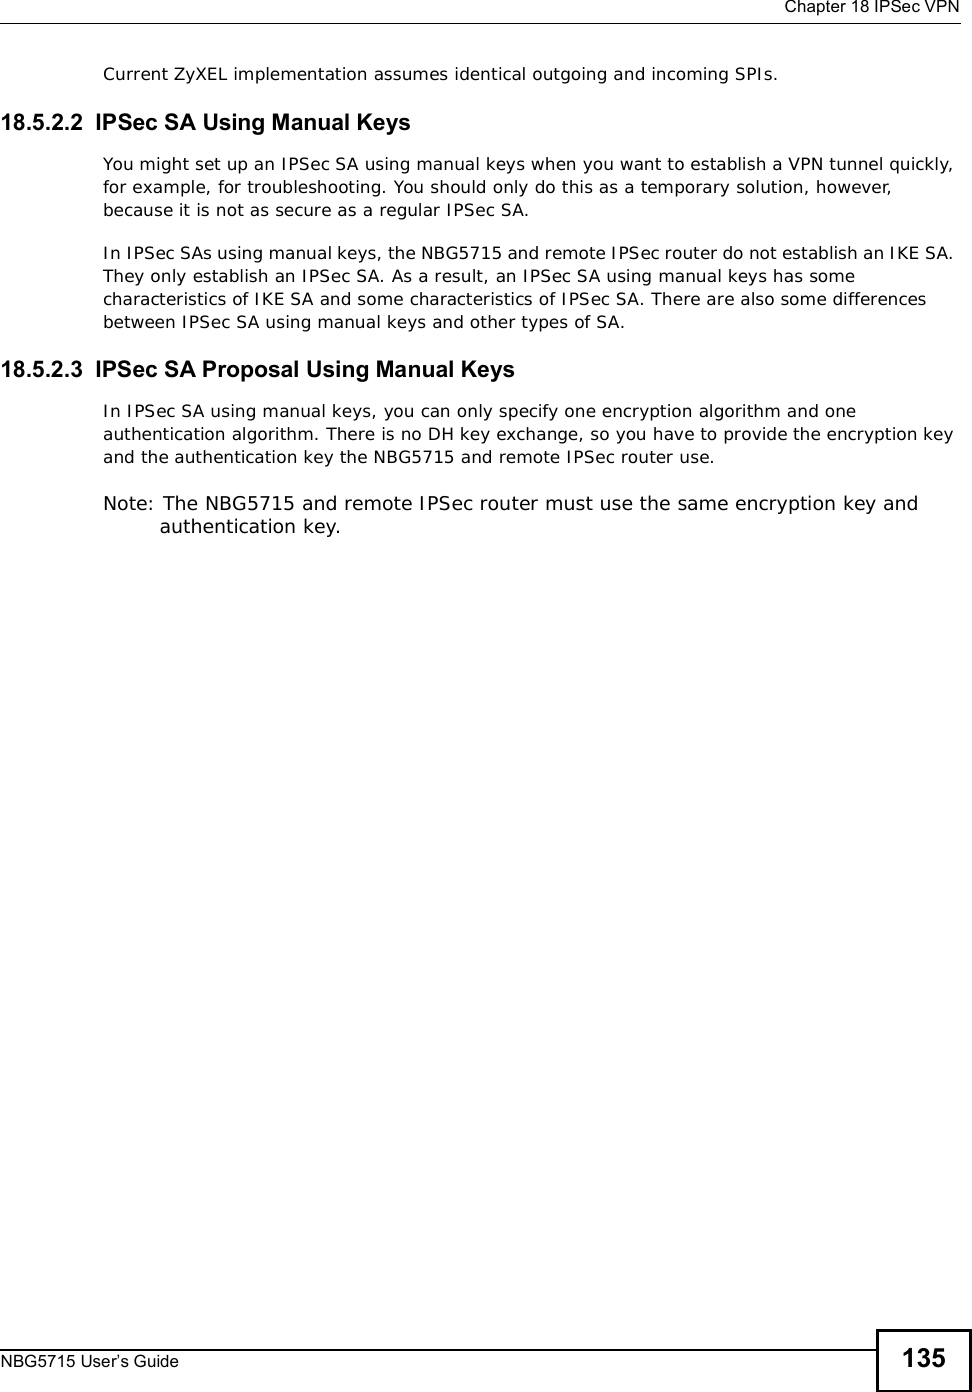  Chapter 18IPSec VPNNBG5715 User’s Guide 135Current ZyXEL implementation assumes identical outgoing and incoming SPIs.18.5.2.2  IPSec SA Using Manual KeysYou might set up an IPSec SA using manual keys when you want to establish a VPN tunnel quickly, for example, for troubleshooting. You should only do this as a temporary solution, however, because it is not as secure as a regular IPSec SA.In IPSec SAs using manual keys, the NBG5715 and remote IPSec router do not establish an IKE SA. They only establish an IPSec SA. As a result, an IPSec SA using manual keys has some characteristics of IKE SA and some characteristics of IPSec SA. There are also some differences between IPSec SA using manual keys and other types of SA.18.5.2.3  IPSec SA Proposal Using Manual KeysIn IPSec SA using manual keys, you can only specify one encryption algorithm and one authentication algorithm. There is no DH key exchange, so you have to provide the encryption key and the authentication key the NBG5715 and remote IPSec router use.Note: The NBG5715 and remote IPSec router must use the same encryption key and authentication key.